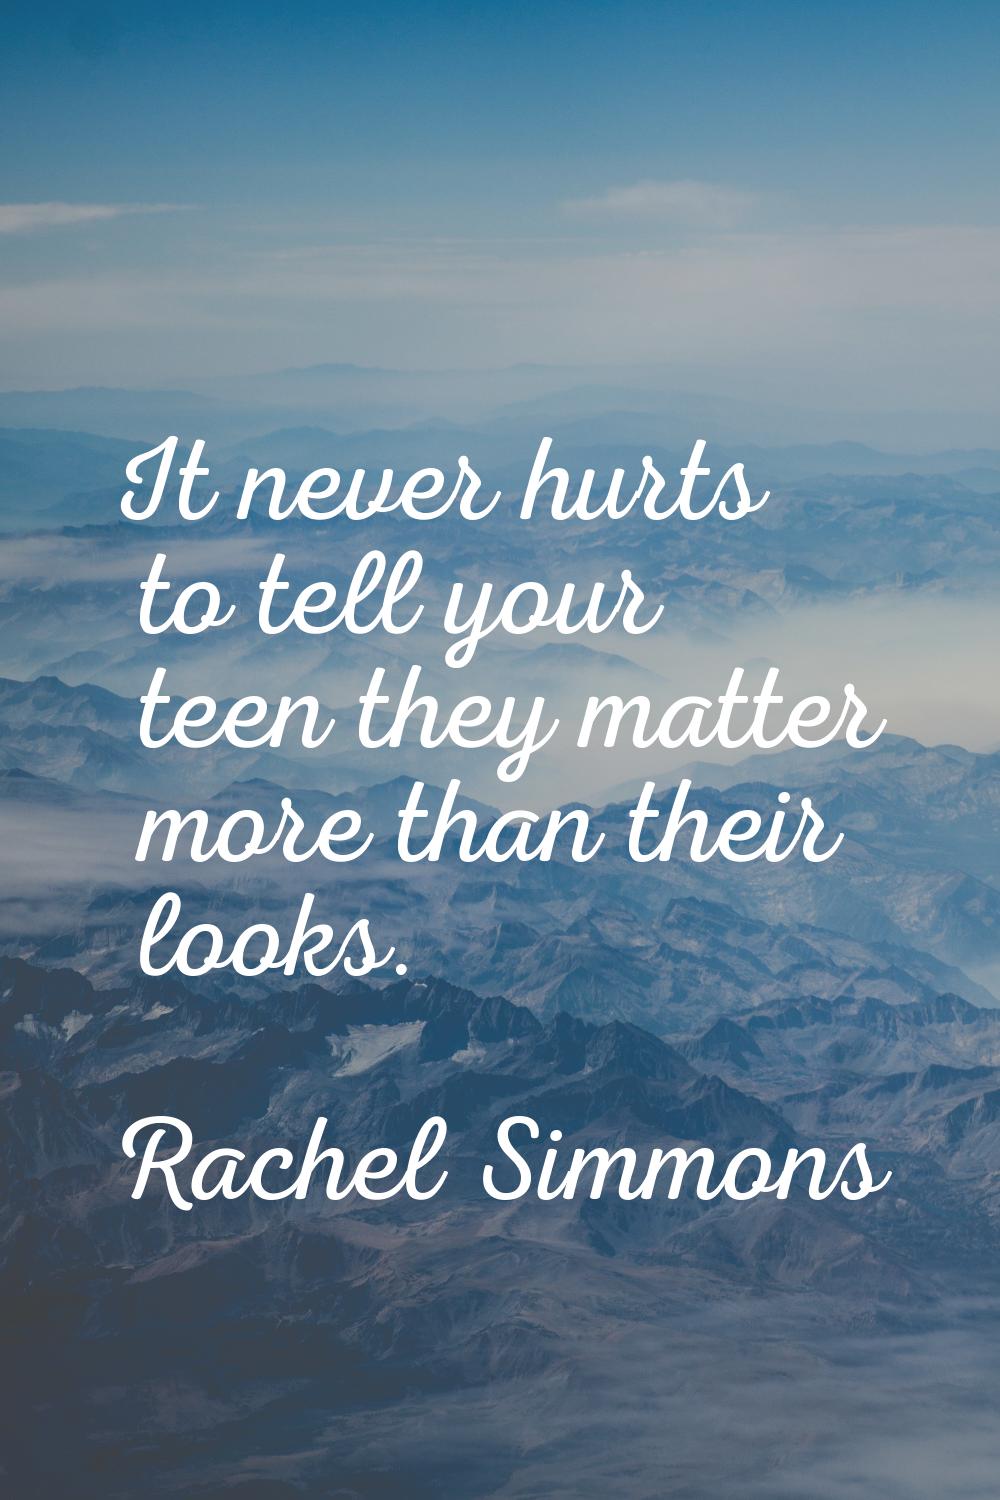 It never hurts to tell your teen they matter more than their looks.